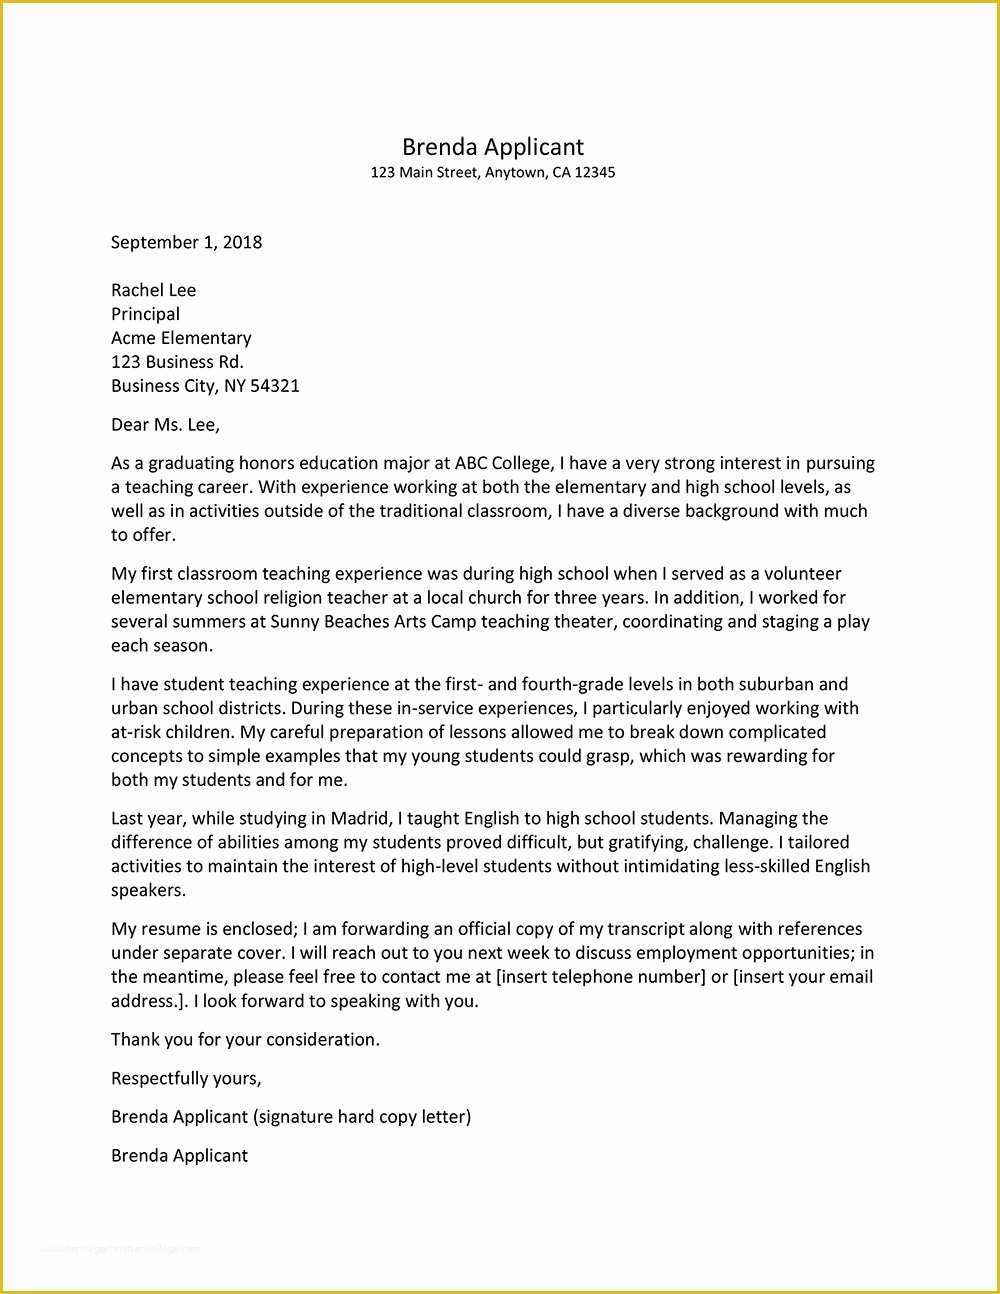 Teacher Cover Letter Template Free Of Do U Need A Resume for Your First Job